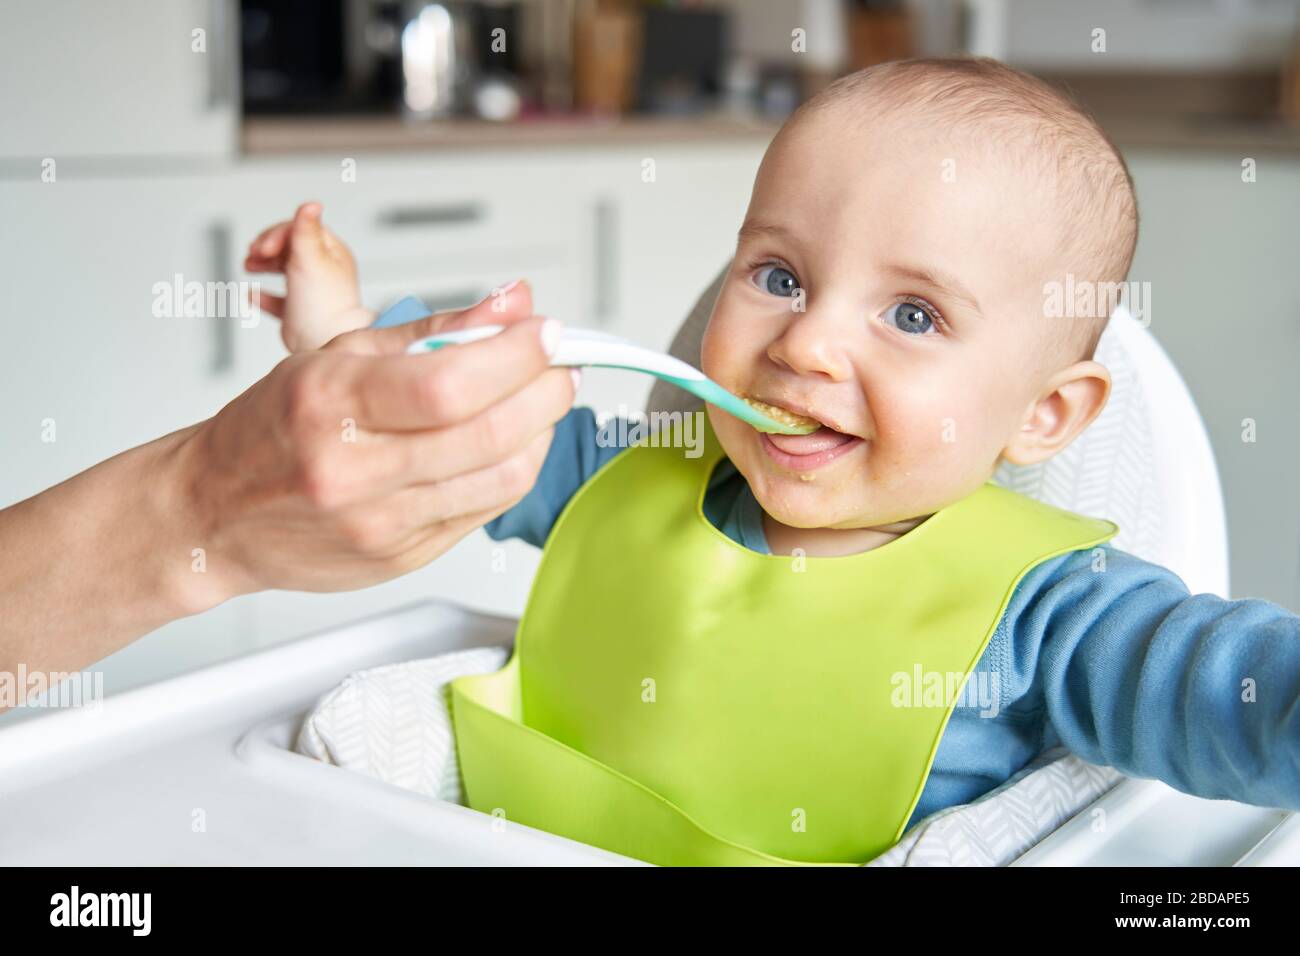 Portrait Of Smiling 8 month Old Baby Boy At Home In High Chair Being Fed Solid Food By Mother With Spoon Stock Photo